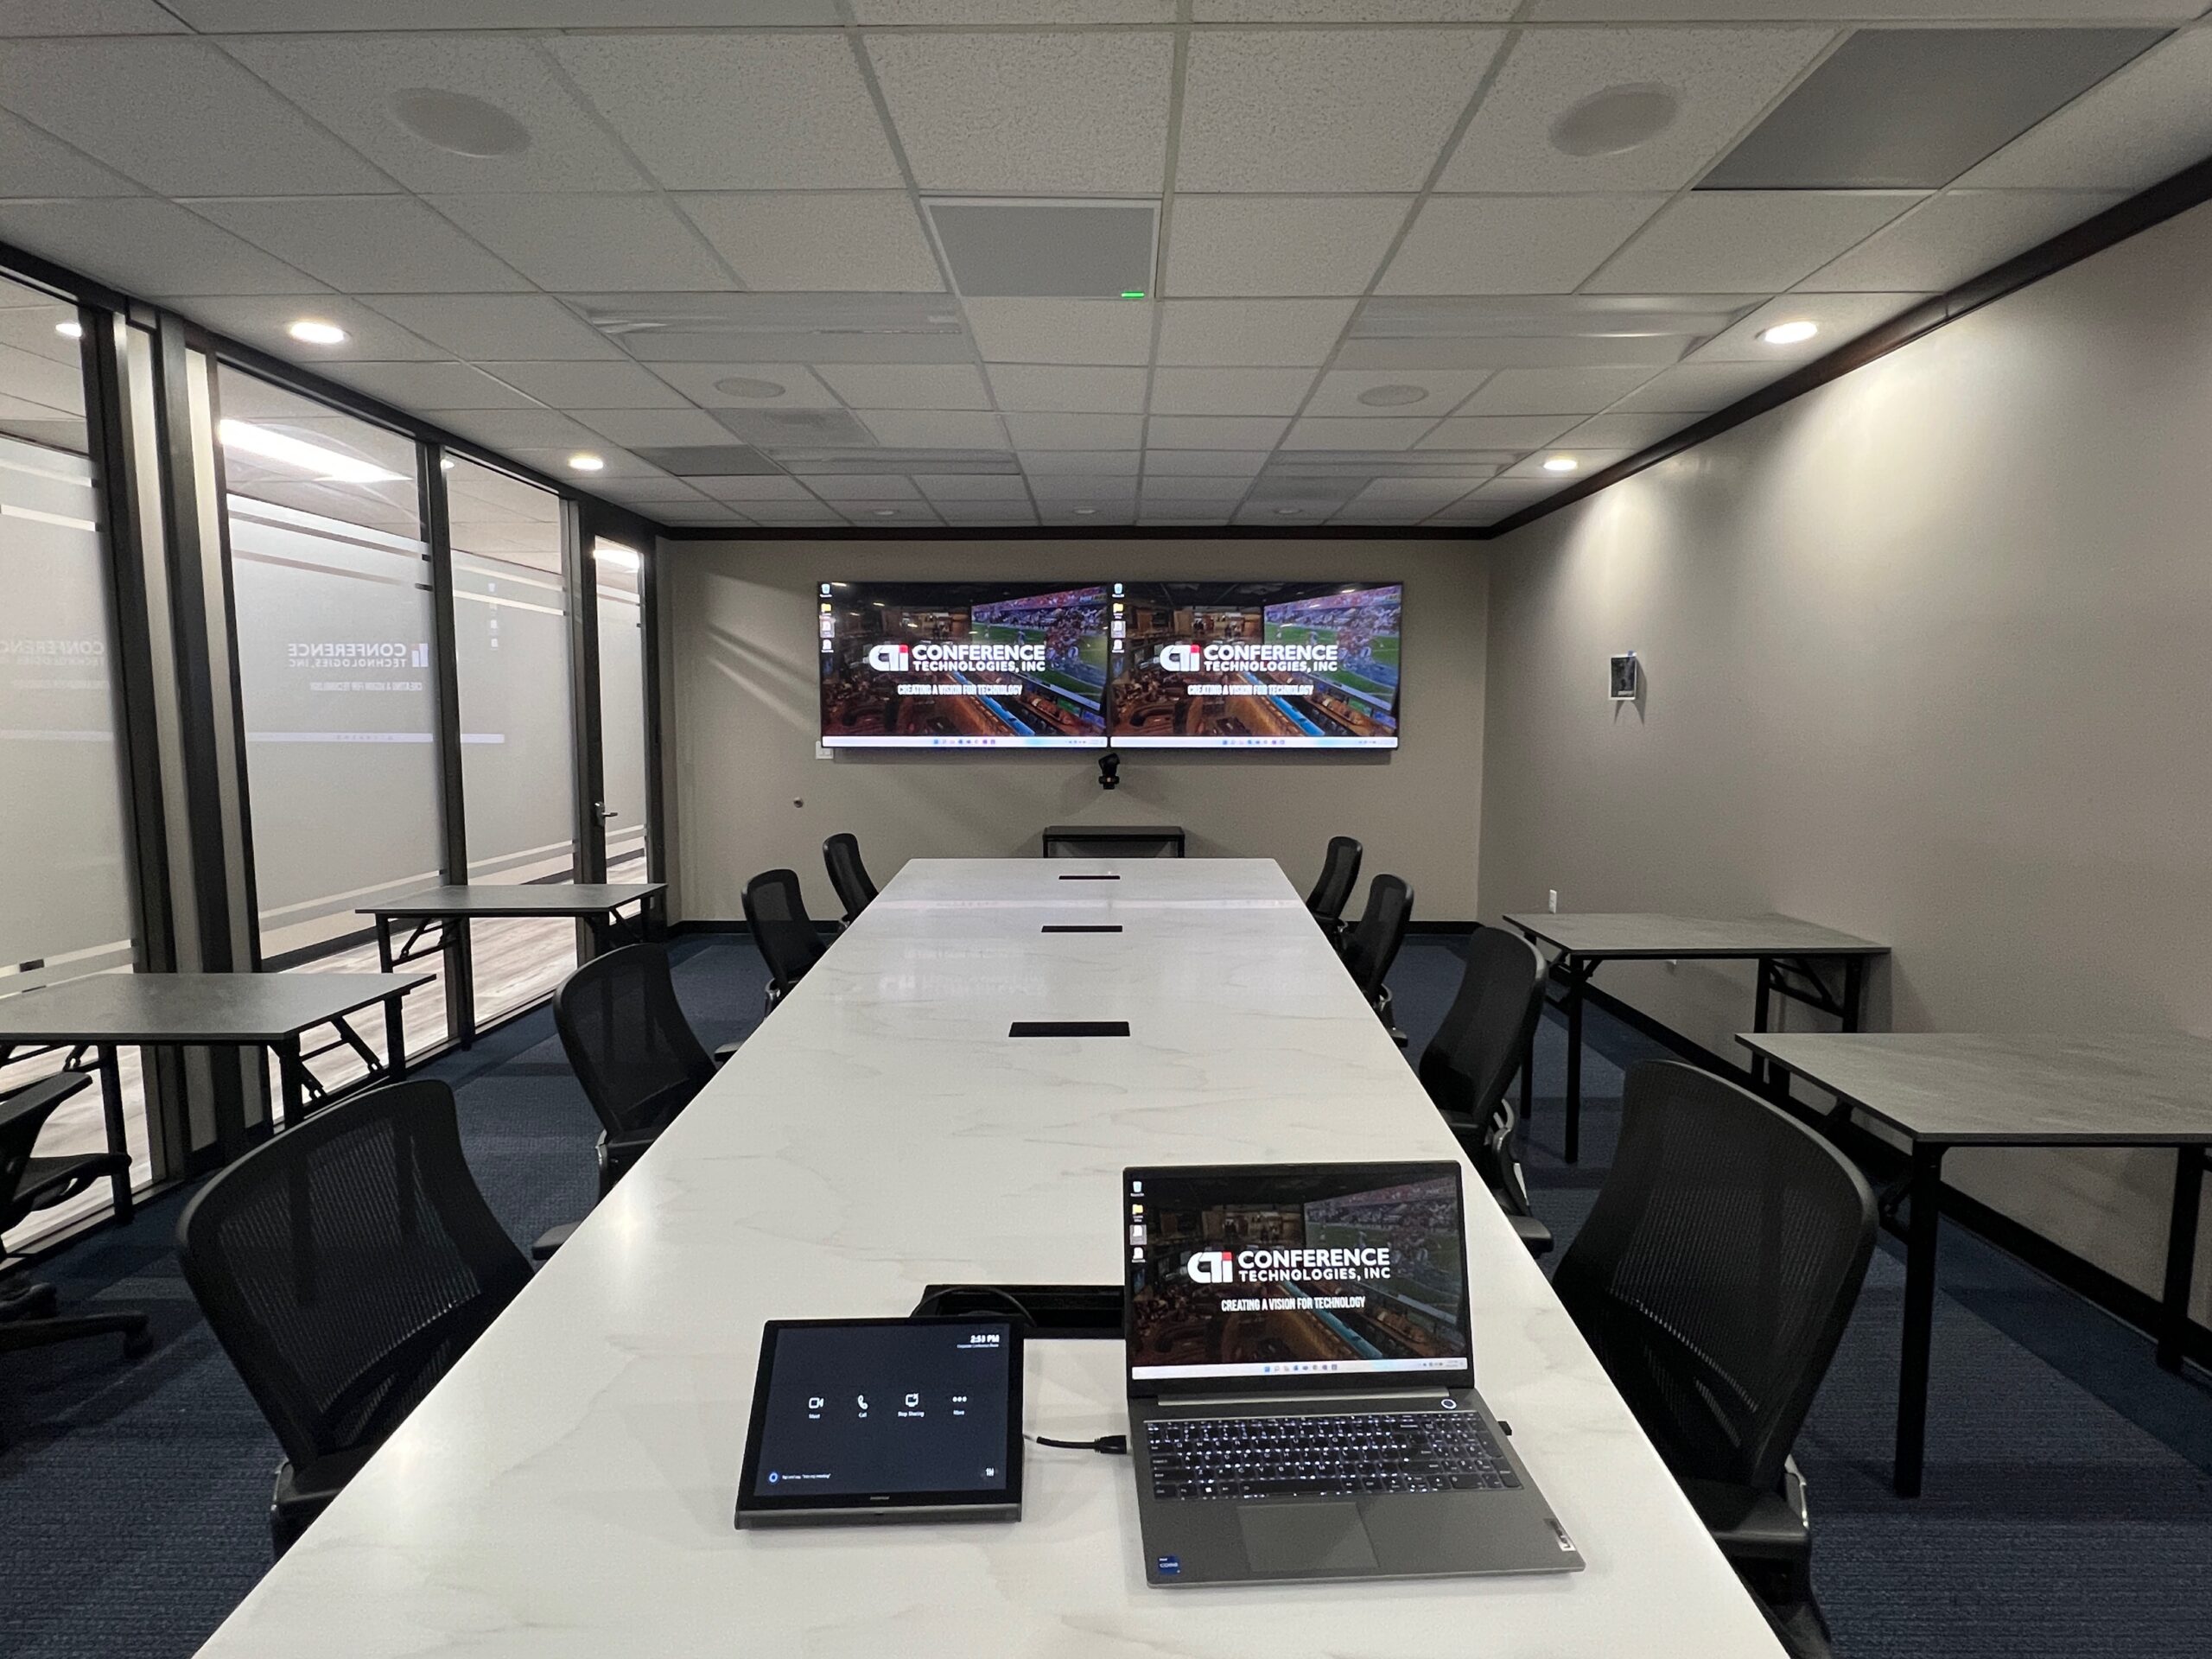 Conference Room Table with laptop and touch panel control